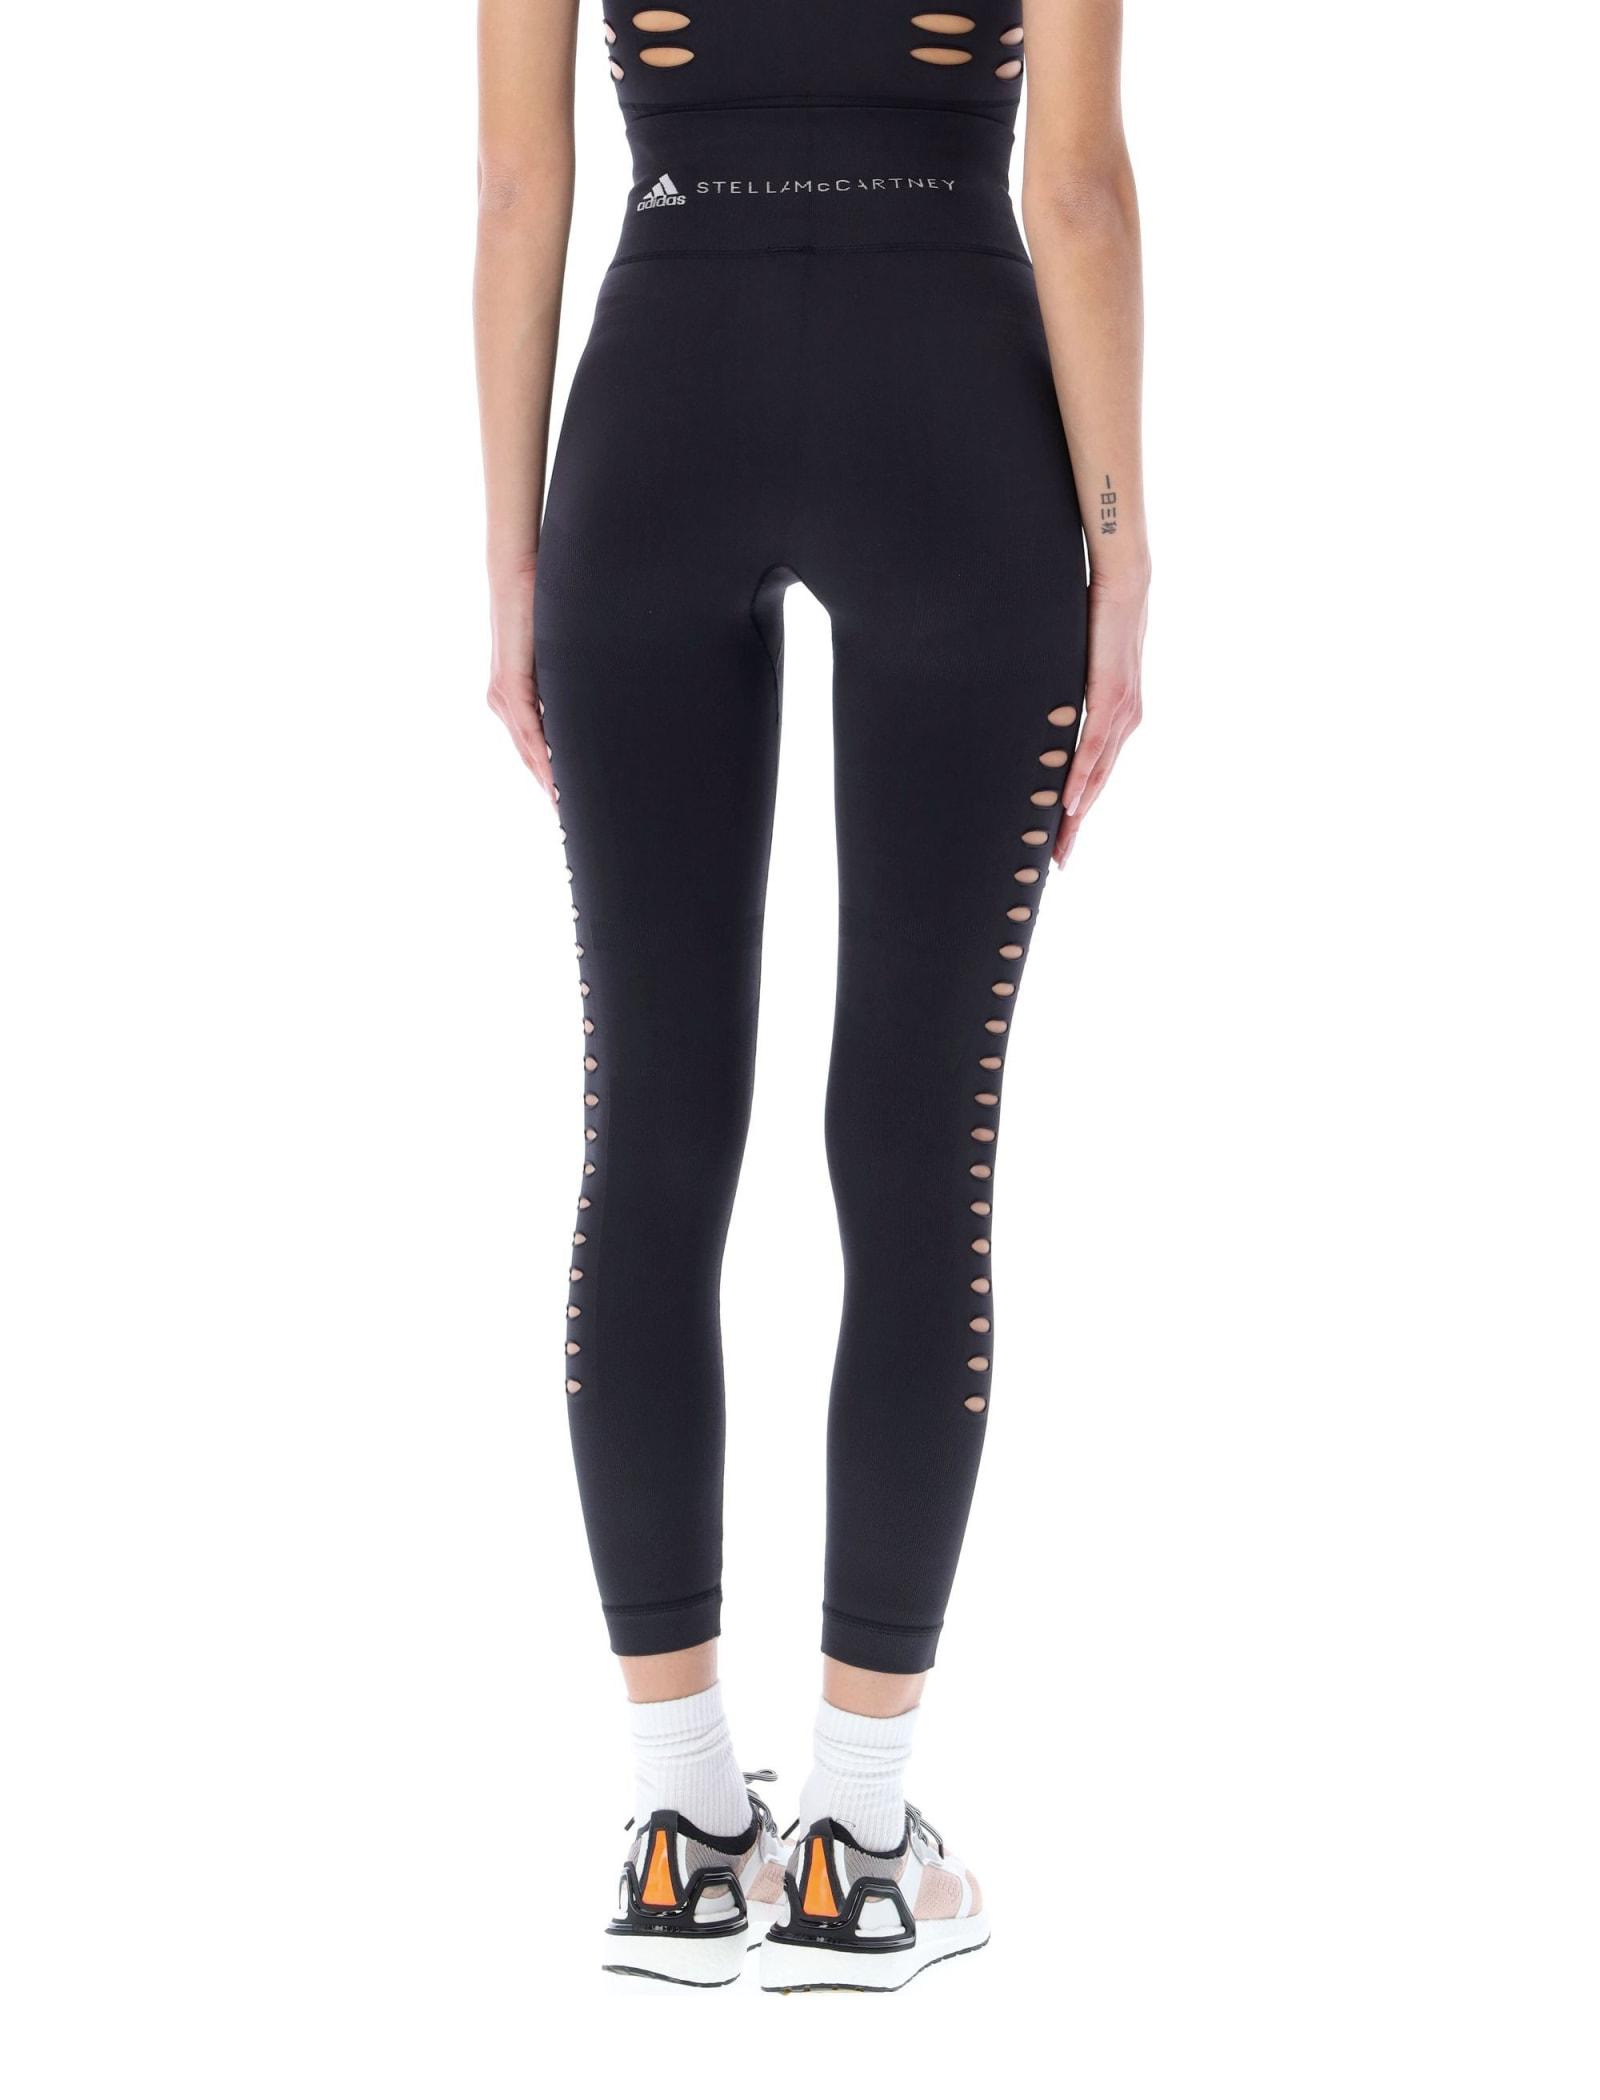 adidas By Stella McCartney Synthetic Cut-out leggings in Black - Save 46% |  Lyst